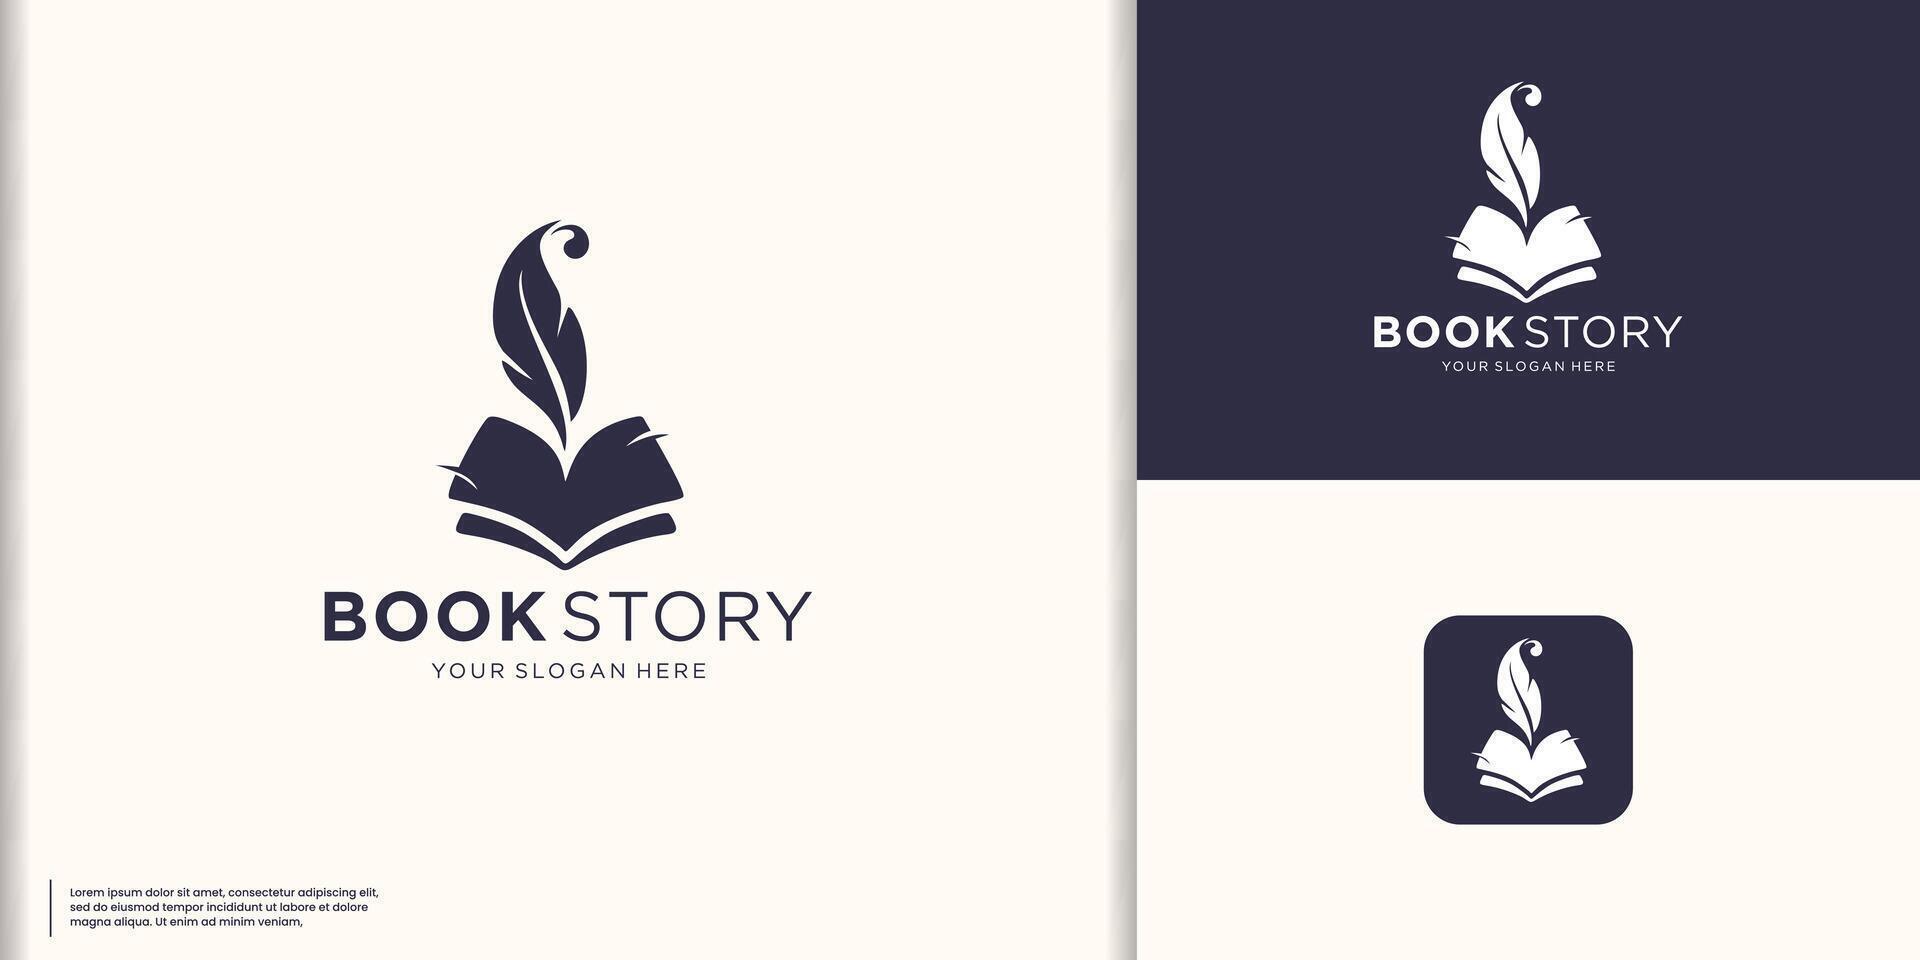 classic book story logo inspiration, Quill and book logo vertical shape concept. vector